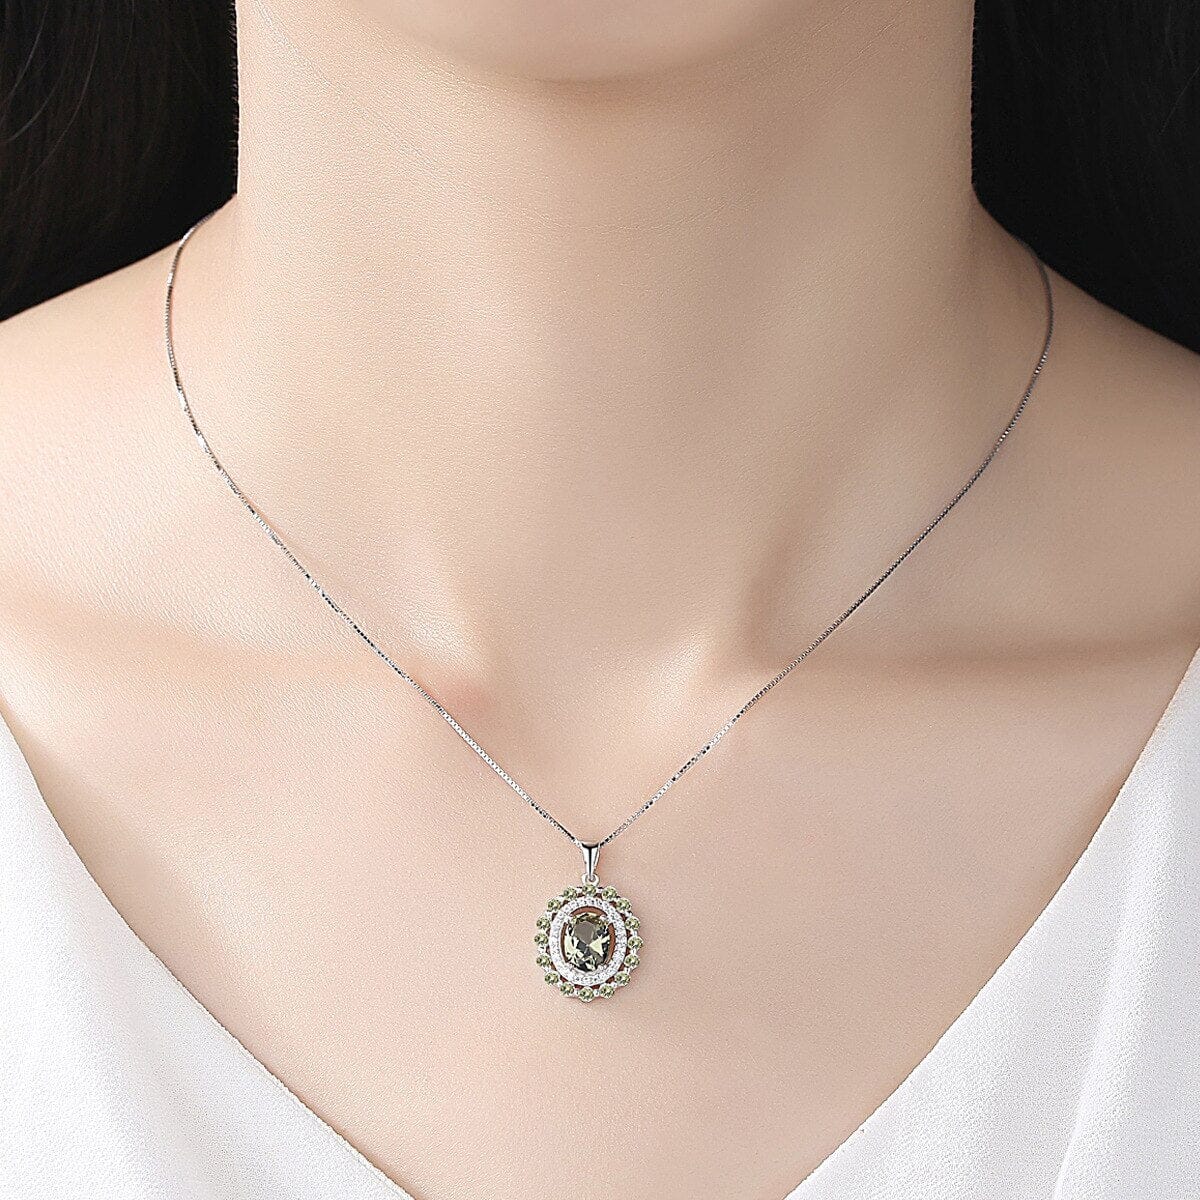 Luxury 6*8mm Peridot Pendant Necklace - S925 Solid SilverNecklace